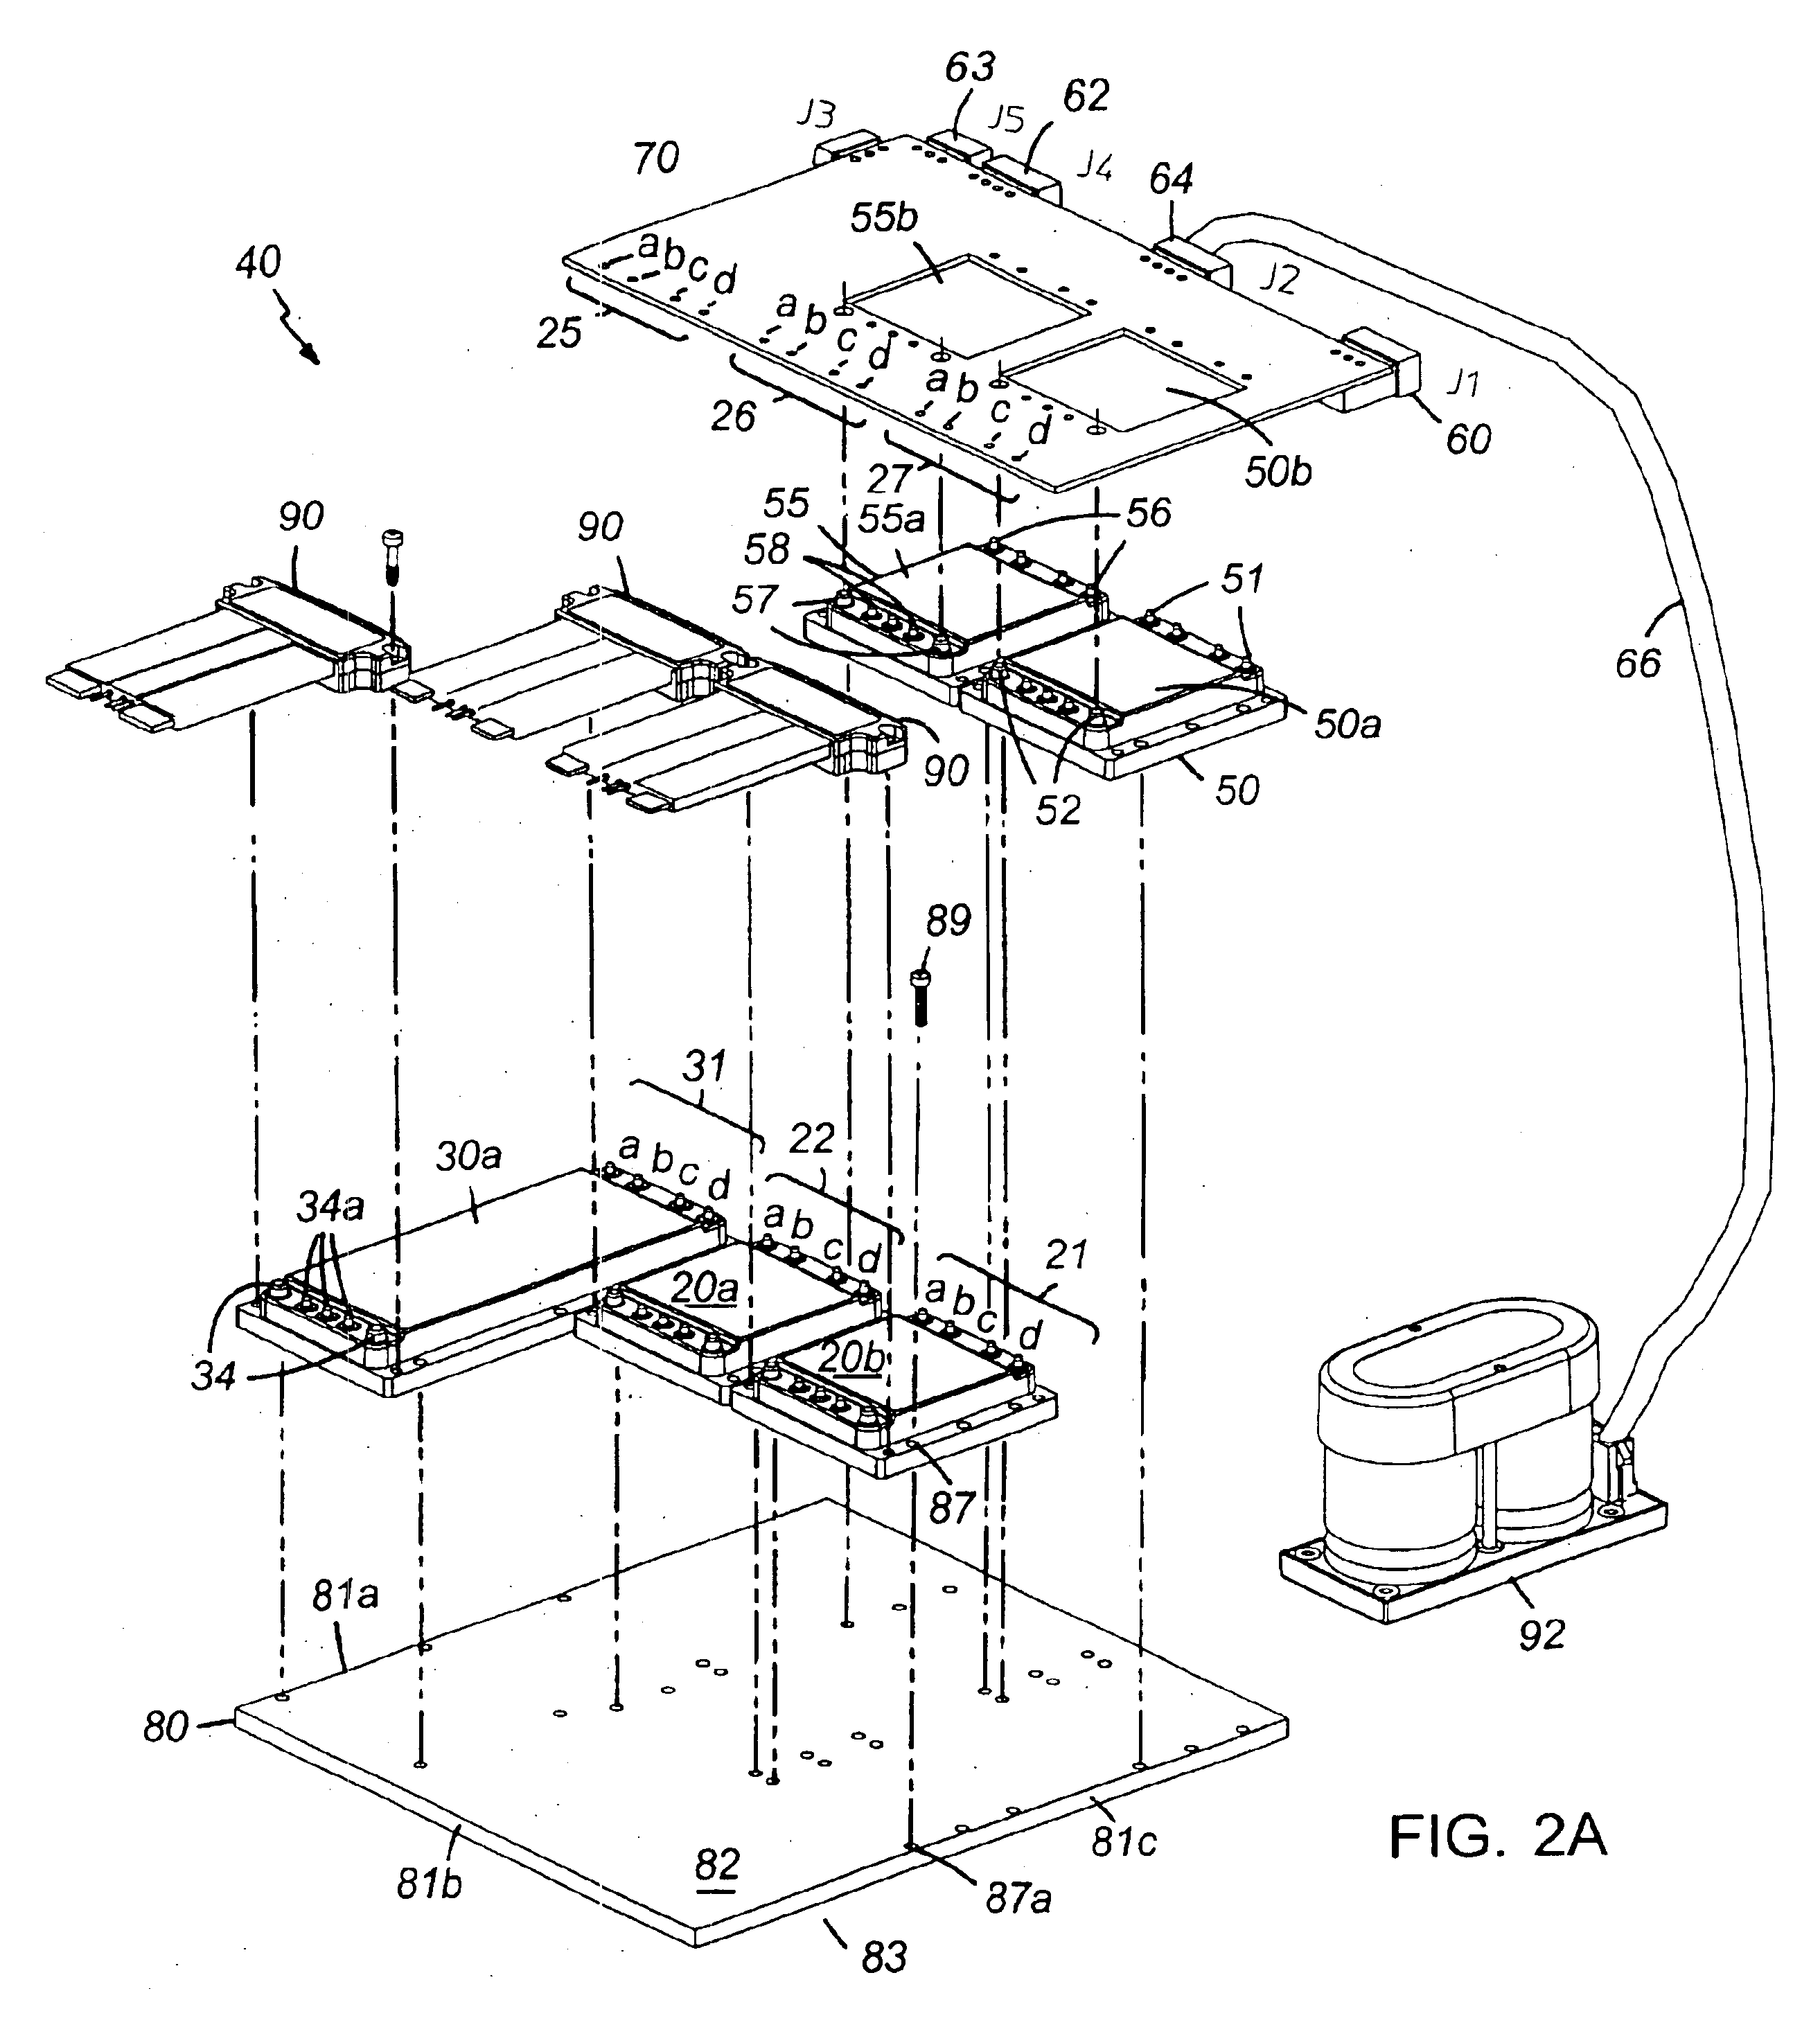 Fabrication rules based automated design and manufacturing system and method